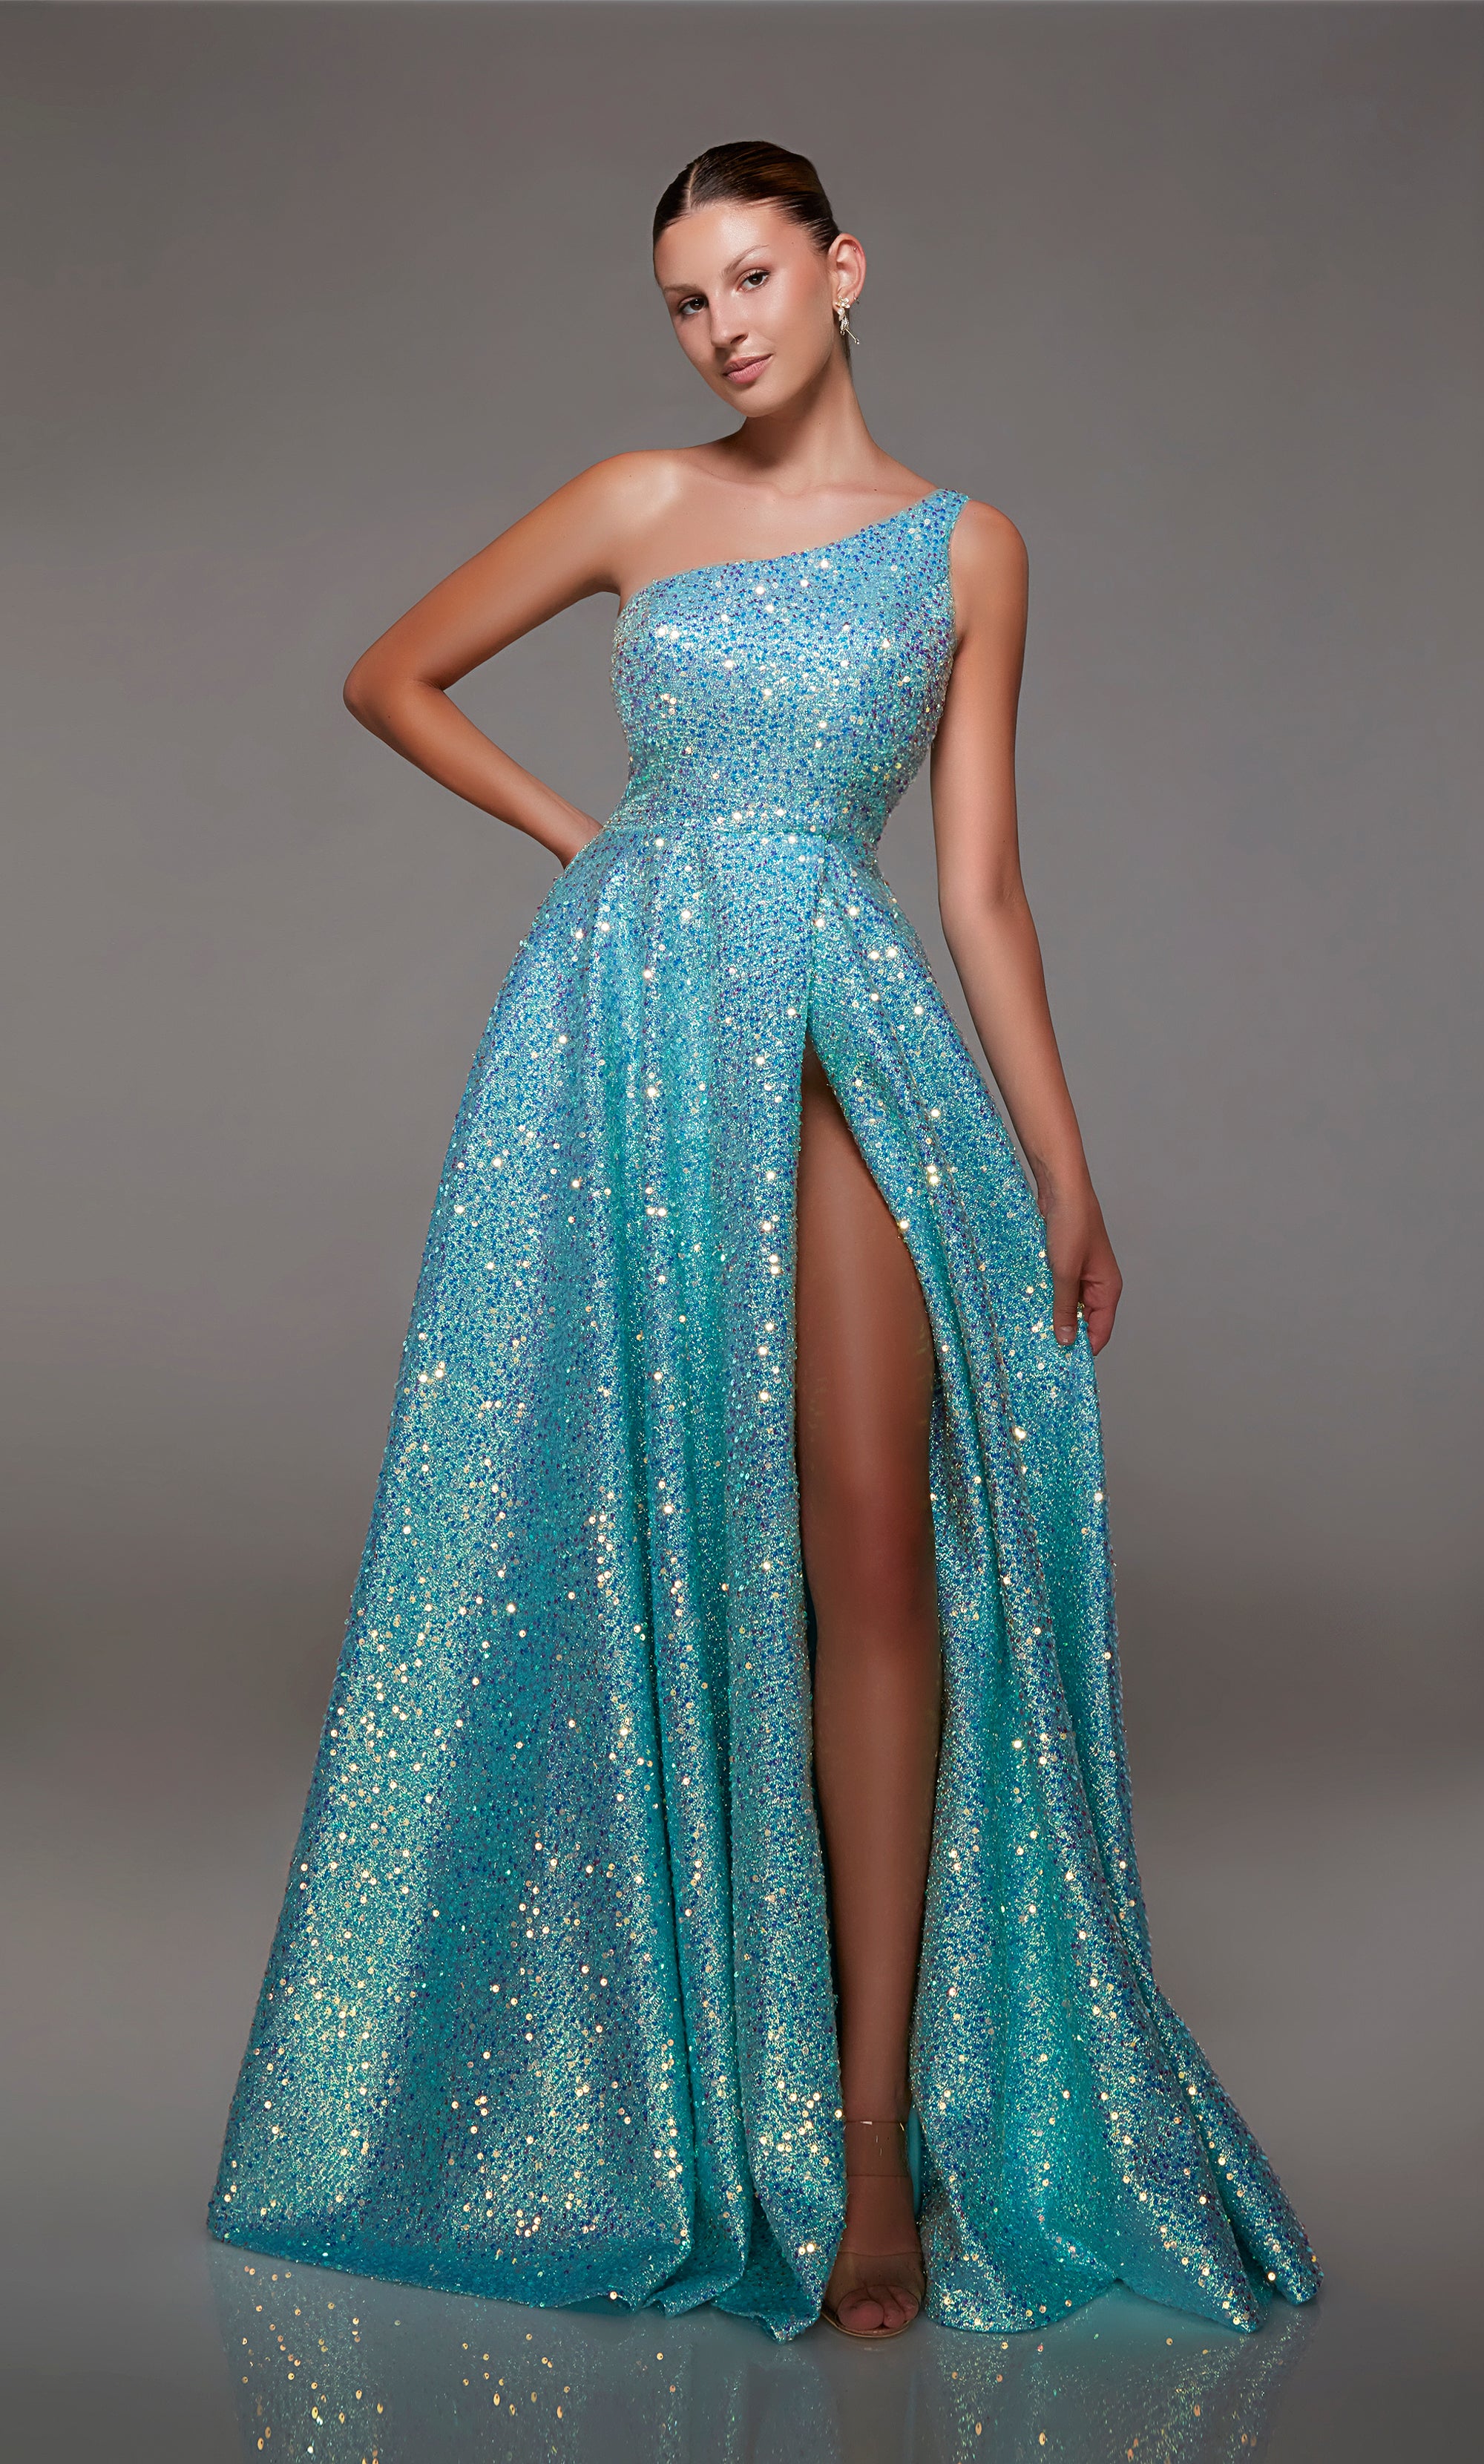 Elegant light blue one-shoulder gown: High slit, zip-up back, and an slight train in sparkly iridescent sequin fabrication for an glamorous and sophisticated look.